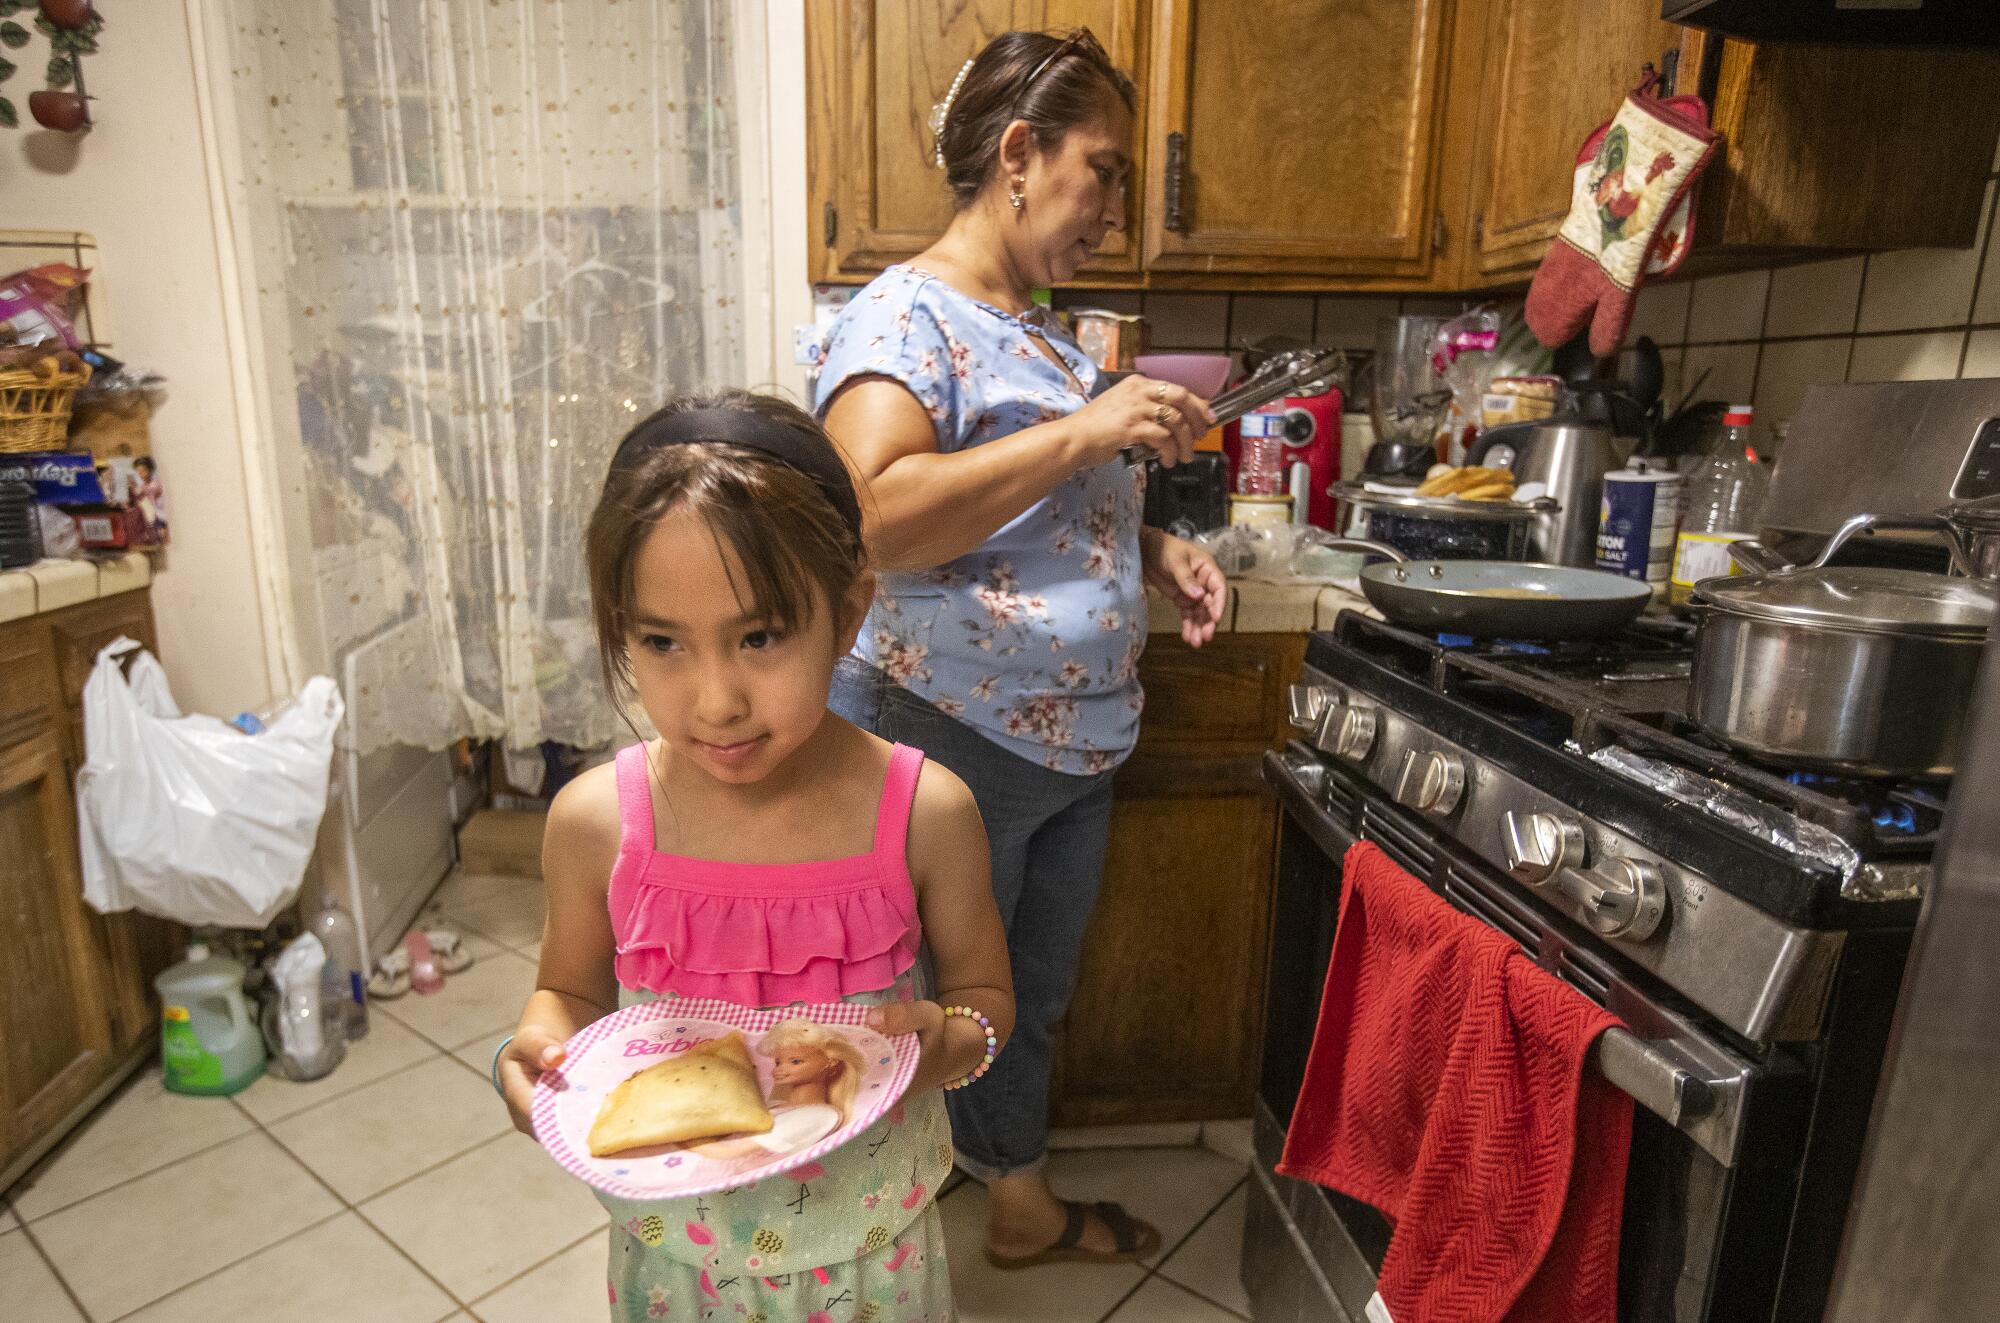 A young girl carries a plate with a quesadilla as her mother cooks in the background